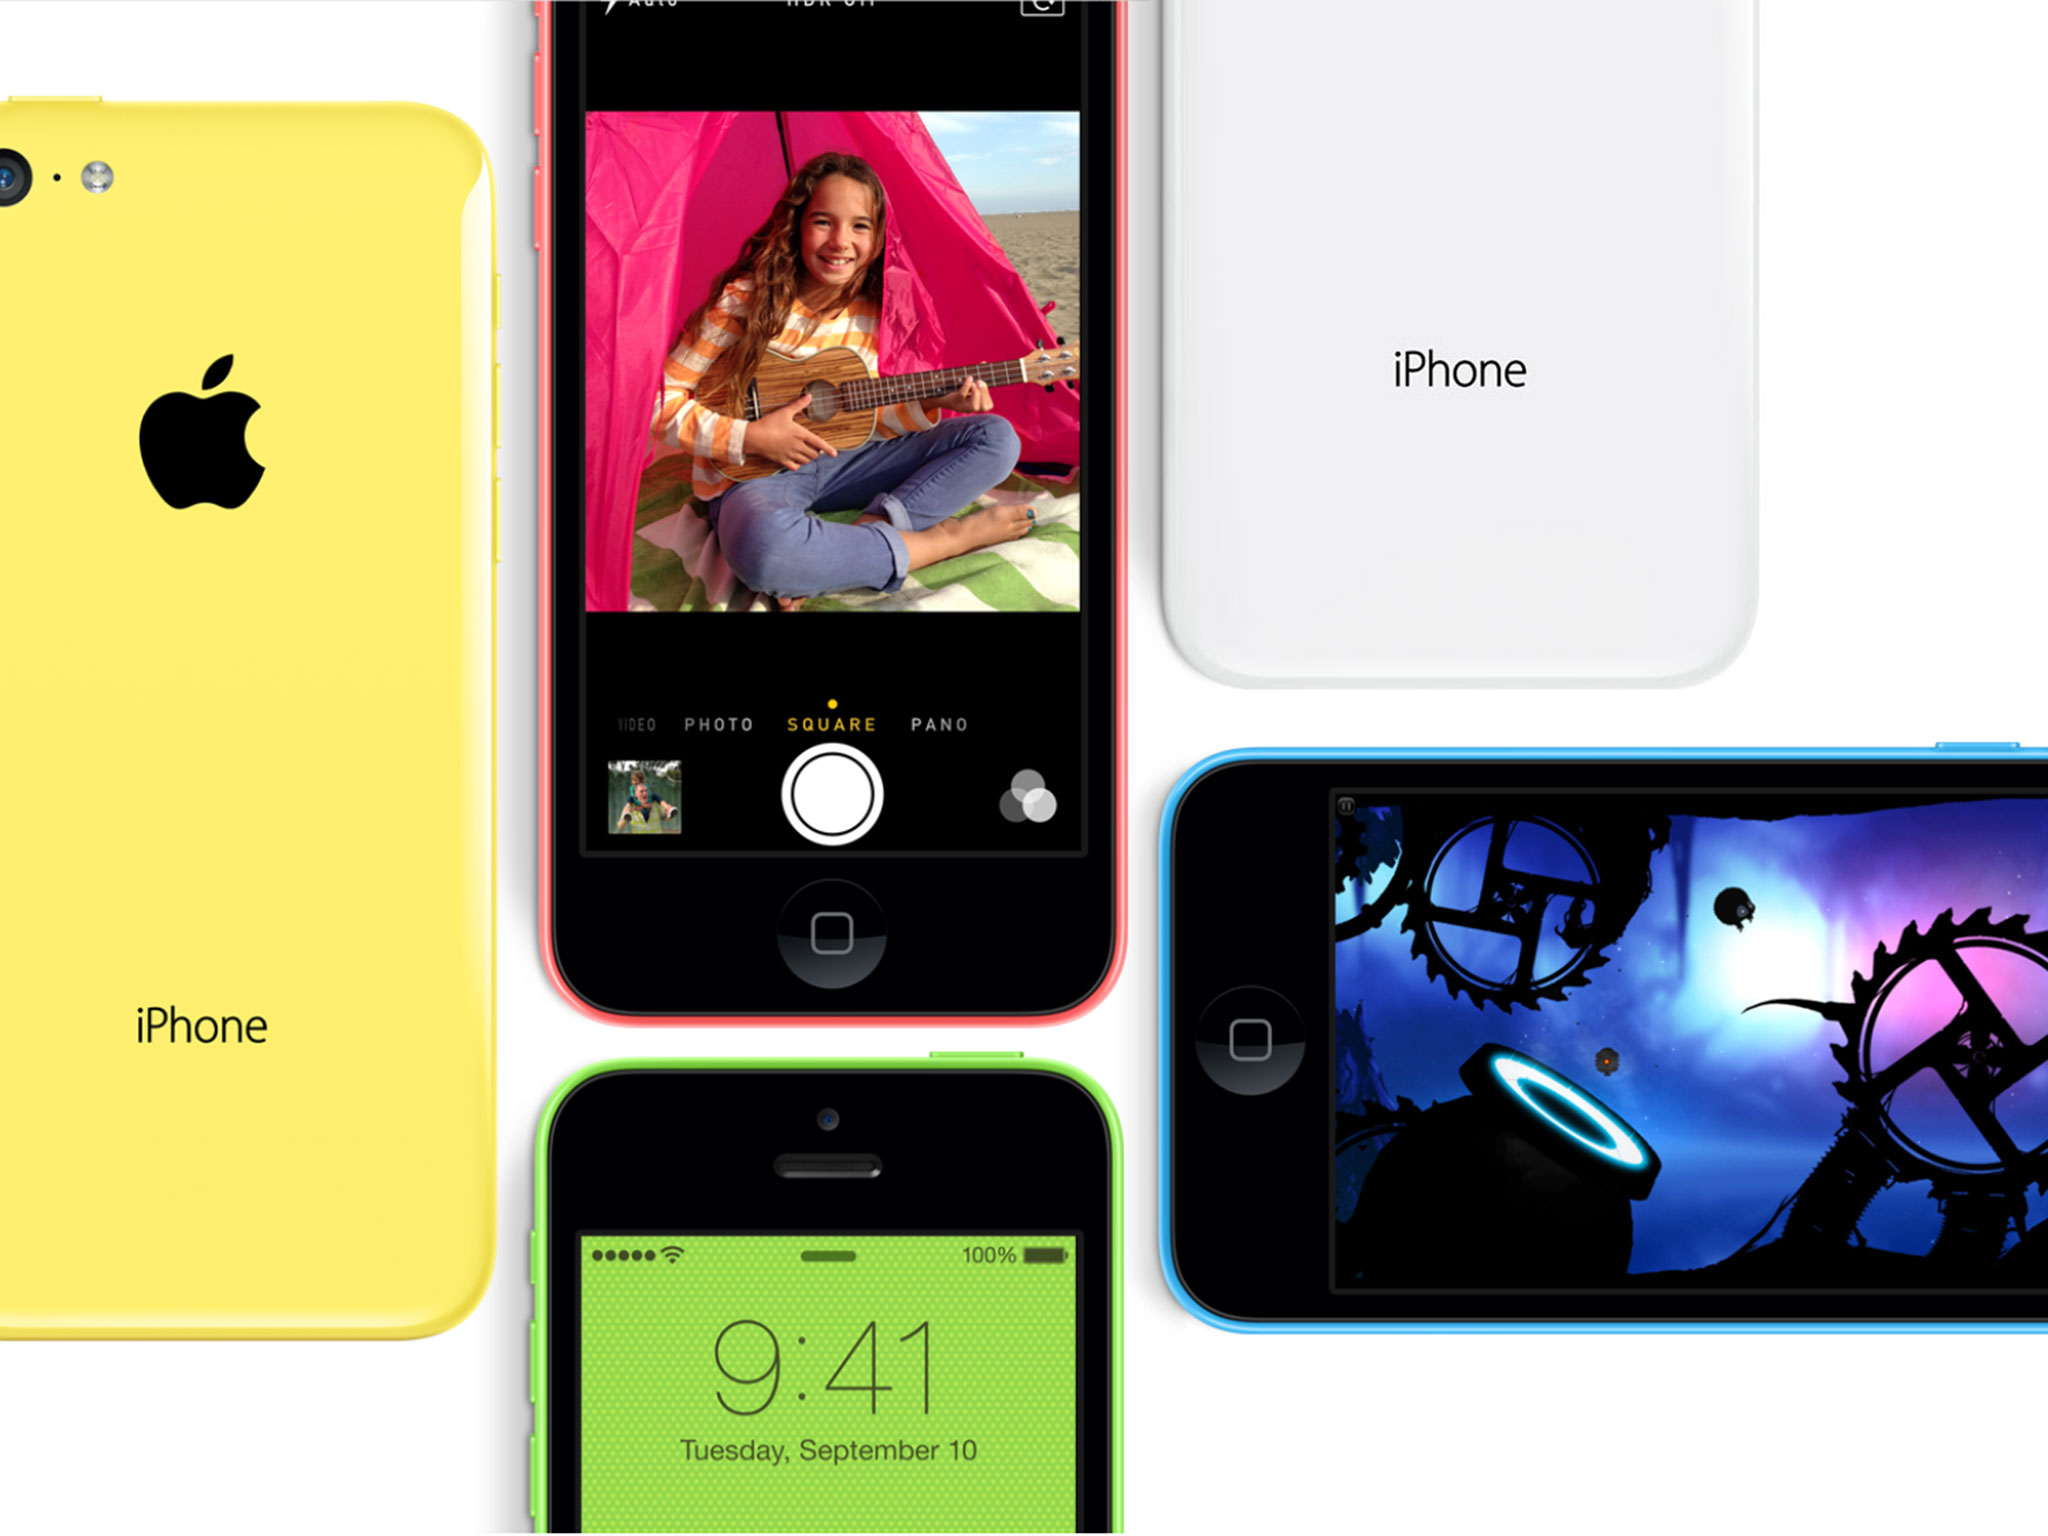 Green vs. blue vs. yellow vs. pink vs. white: Which iPhone 5c color should get?